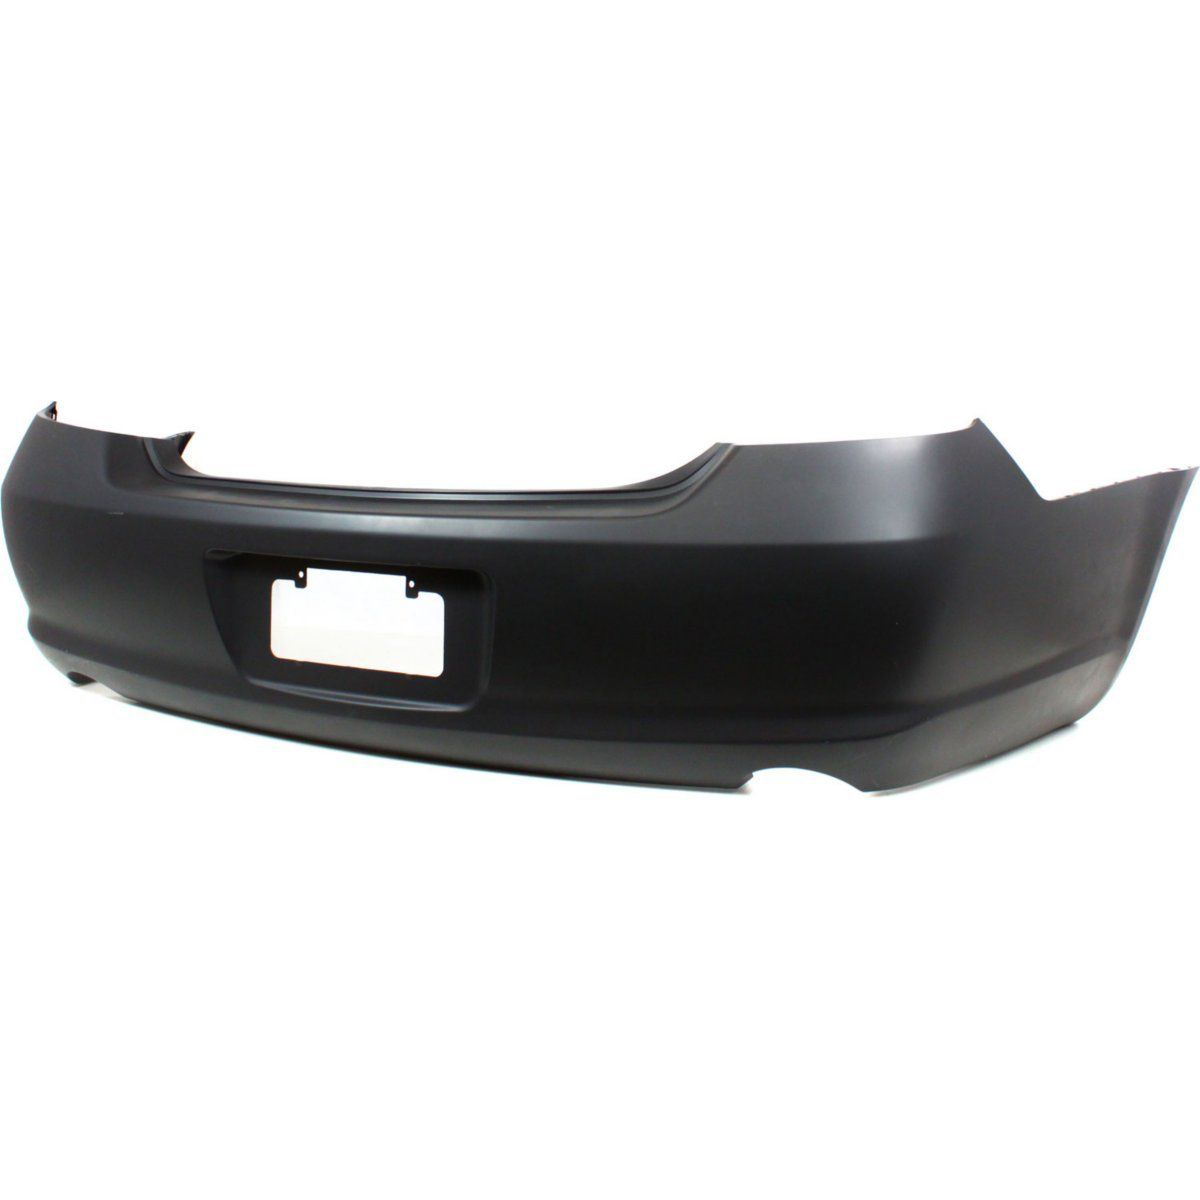 2005-2010 TOYOTA AVALON Rear Bumper Cover Painted to Match